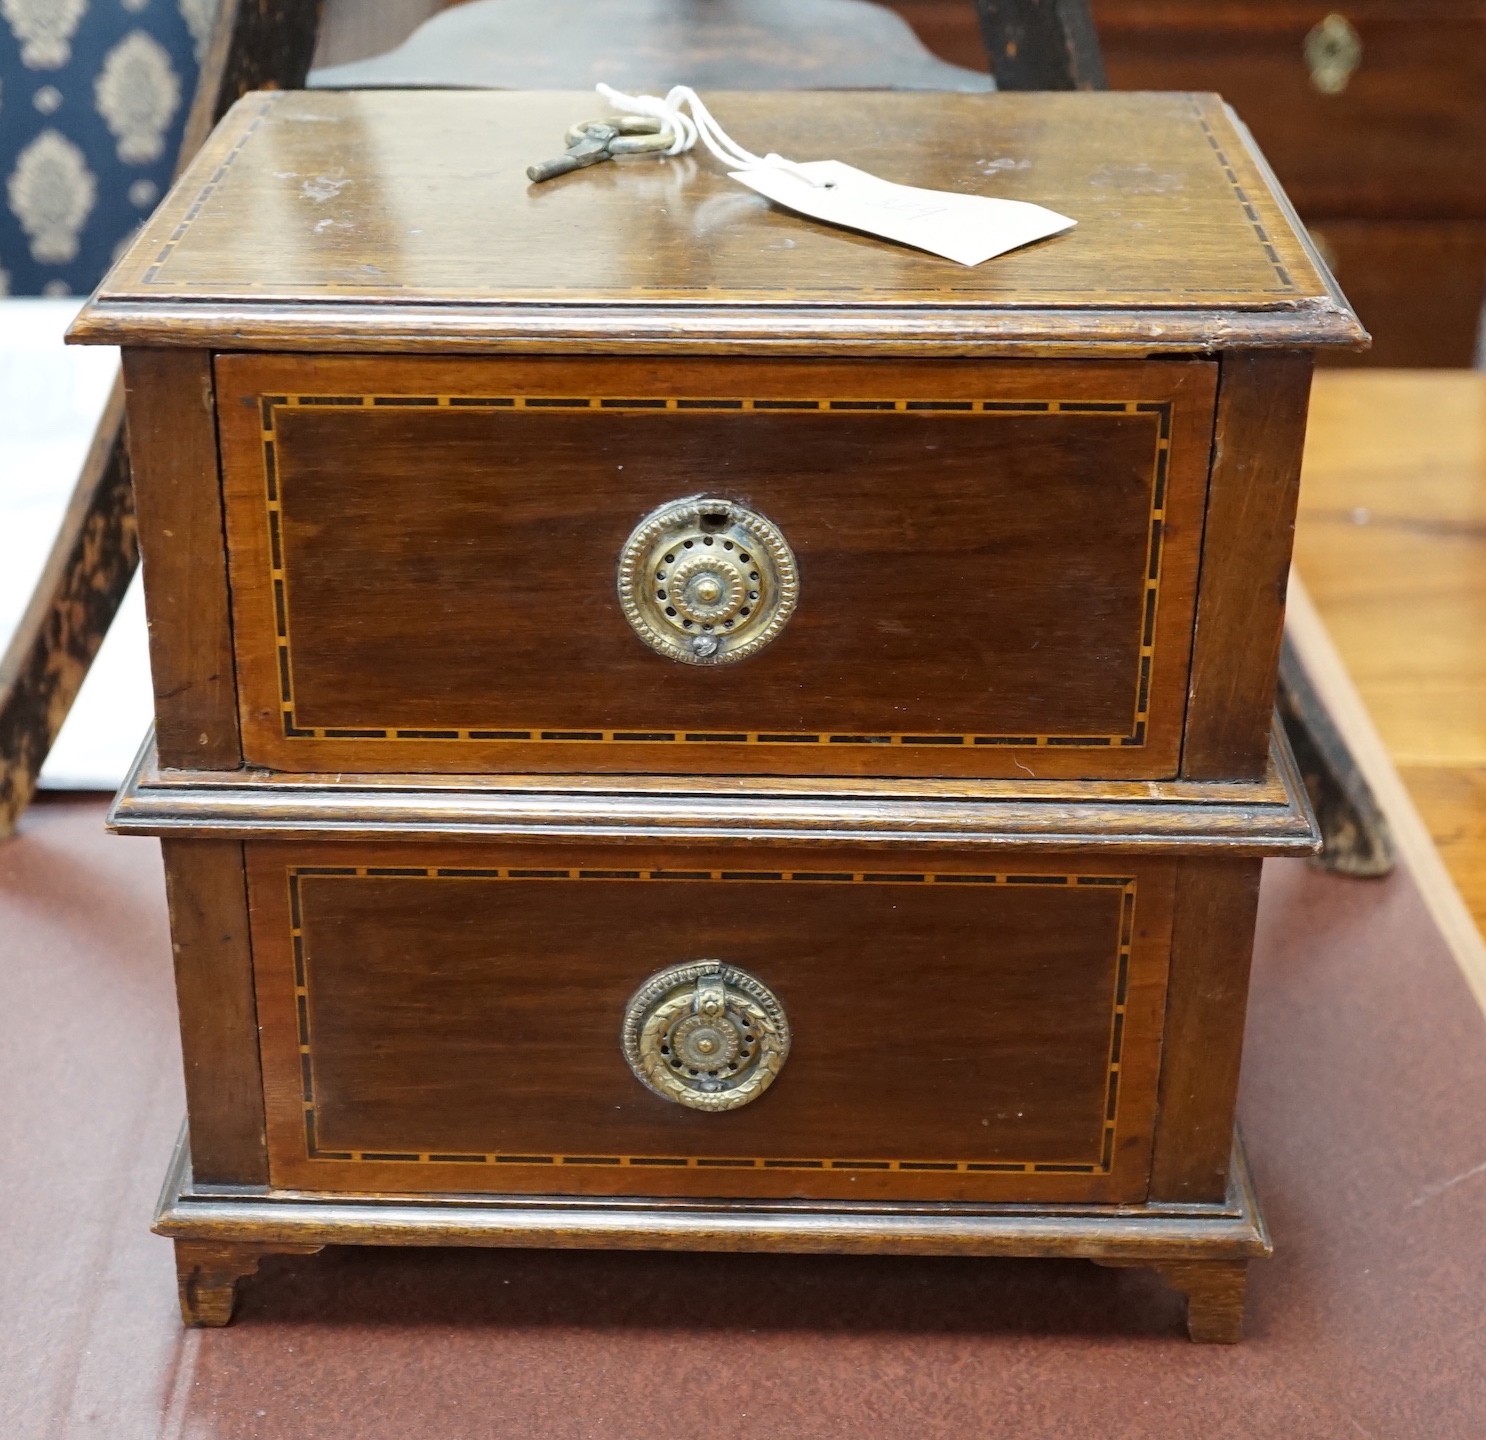 An Edwardian ebonised jardiniere stand with brass liner, width 46cm, depth 46cm, height 85cm, and a miniature two drawer chest *Please note the sale commences at 9am.